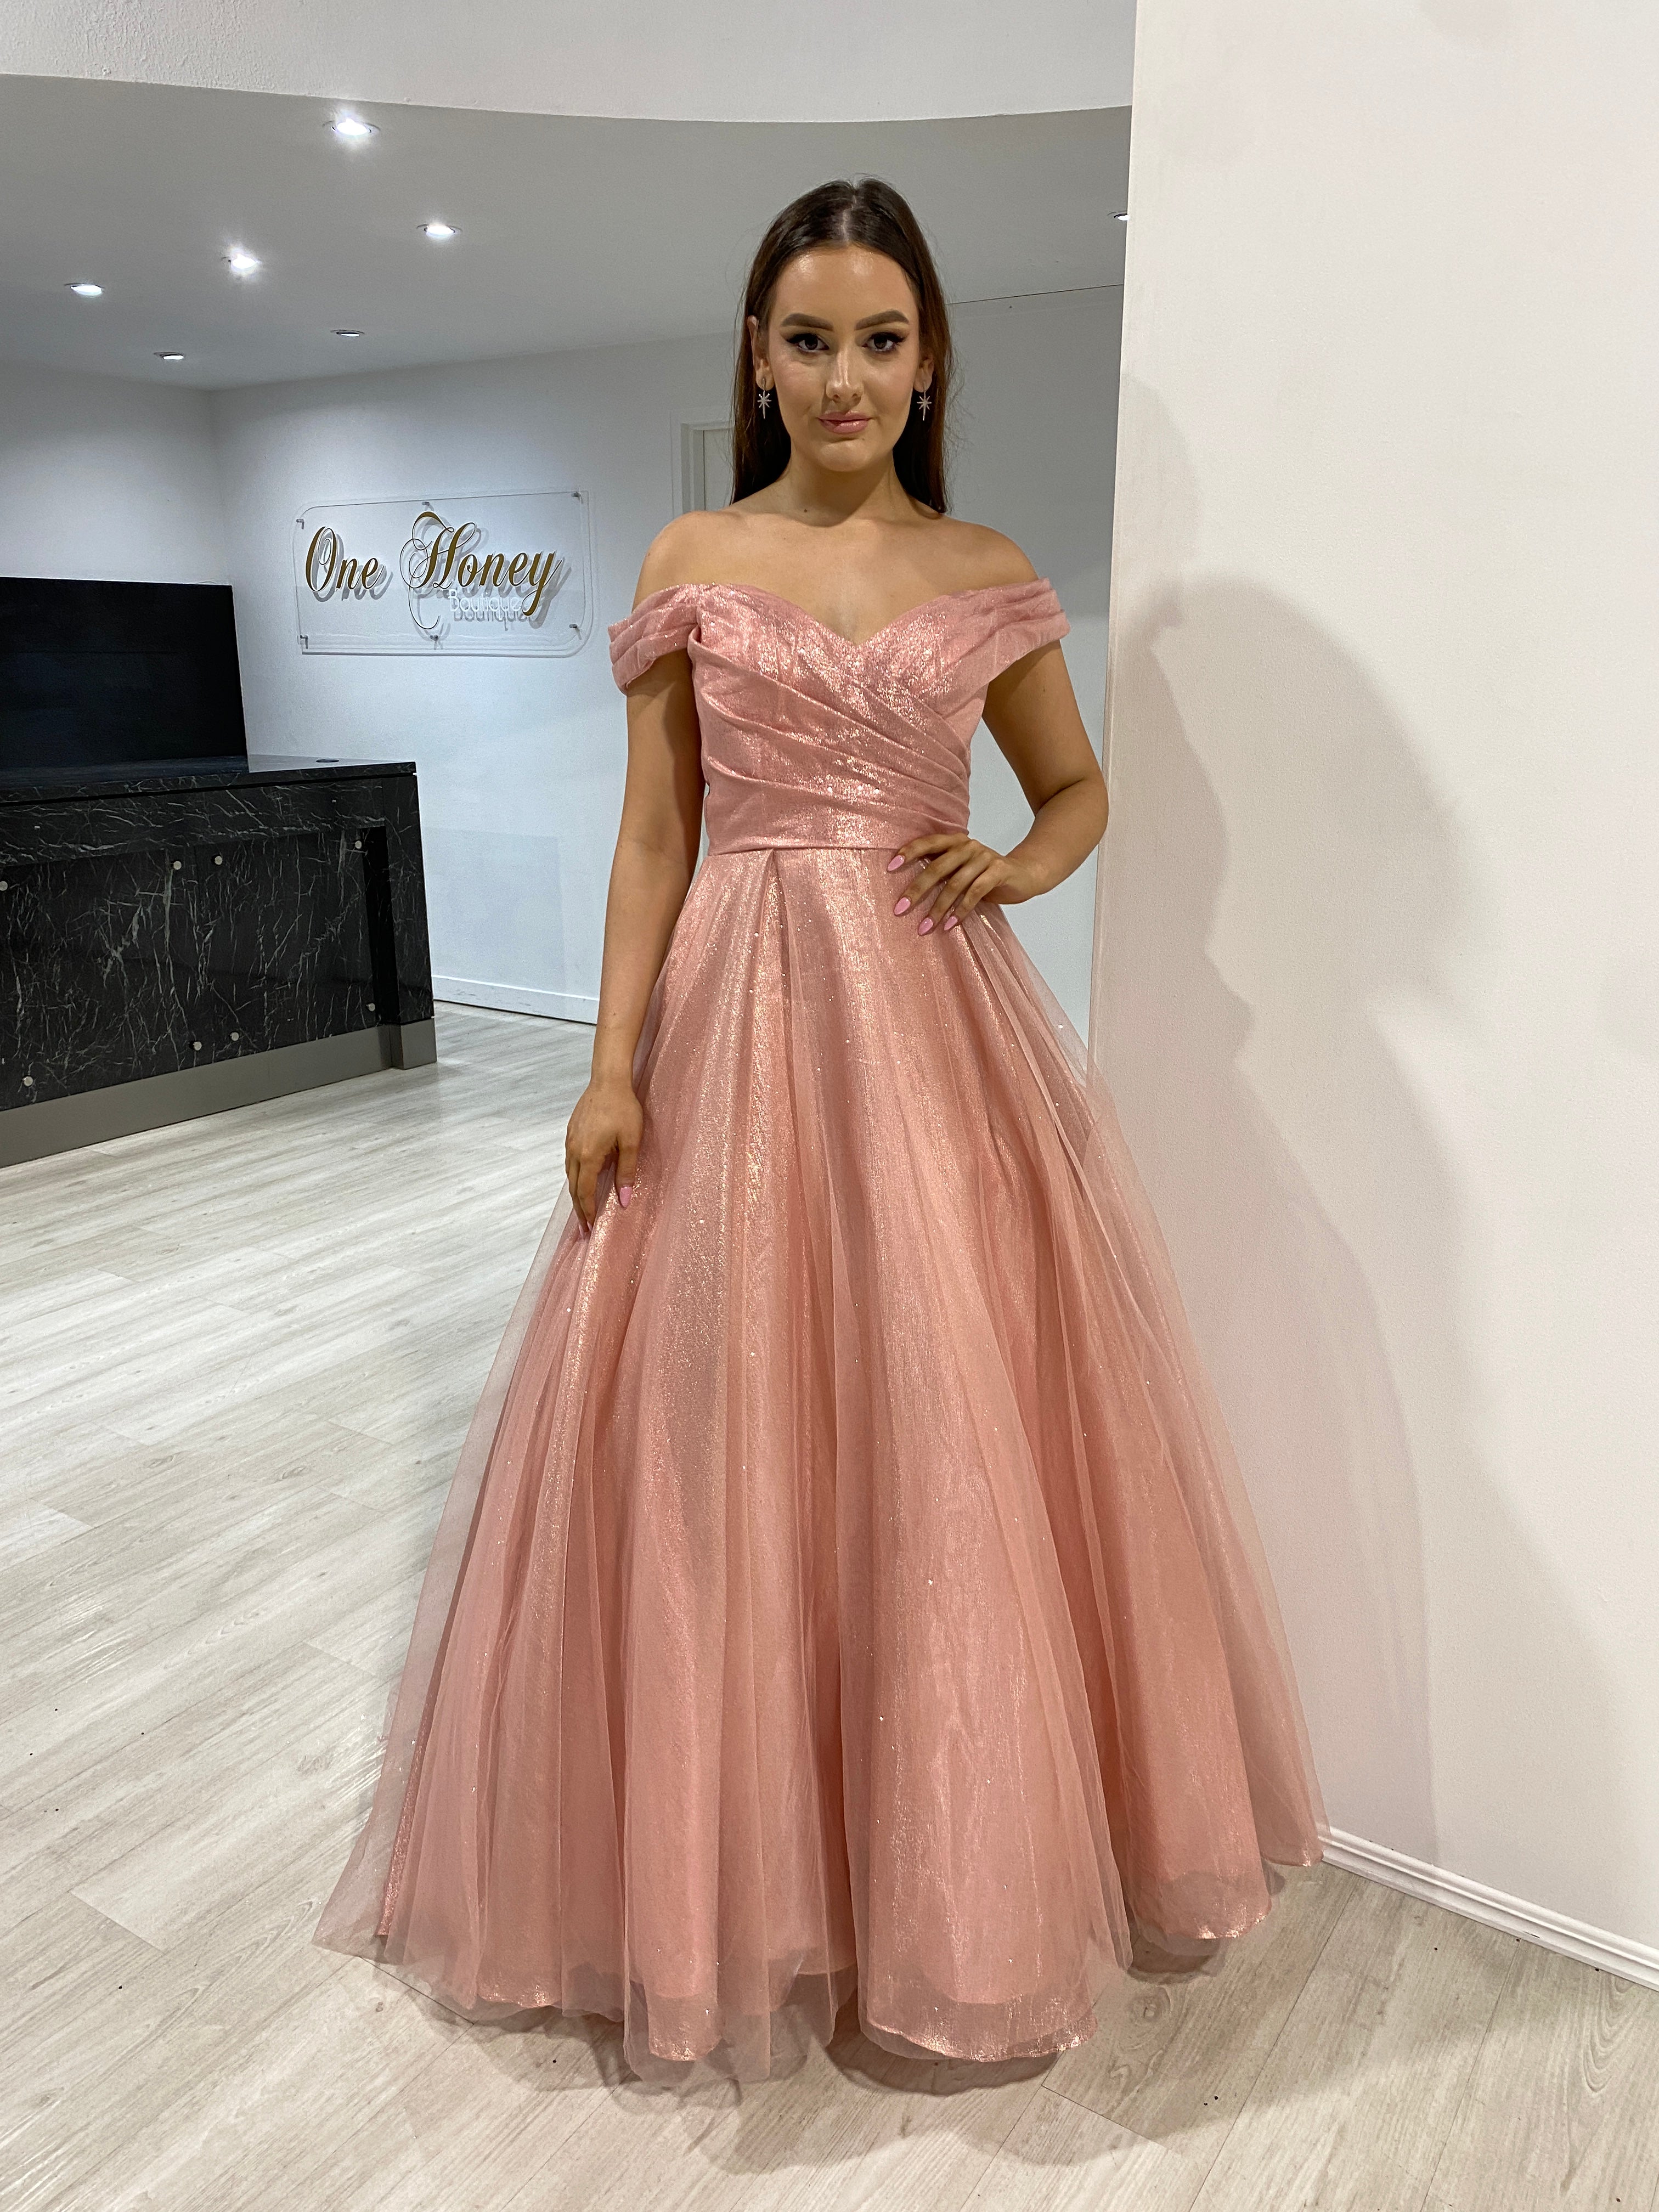 Honey Couture ARIANA Blush Pink Shimmer Ballgown Formal Dress